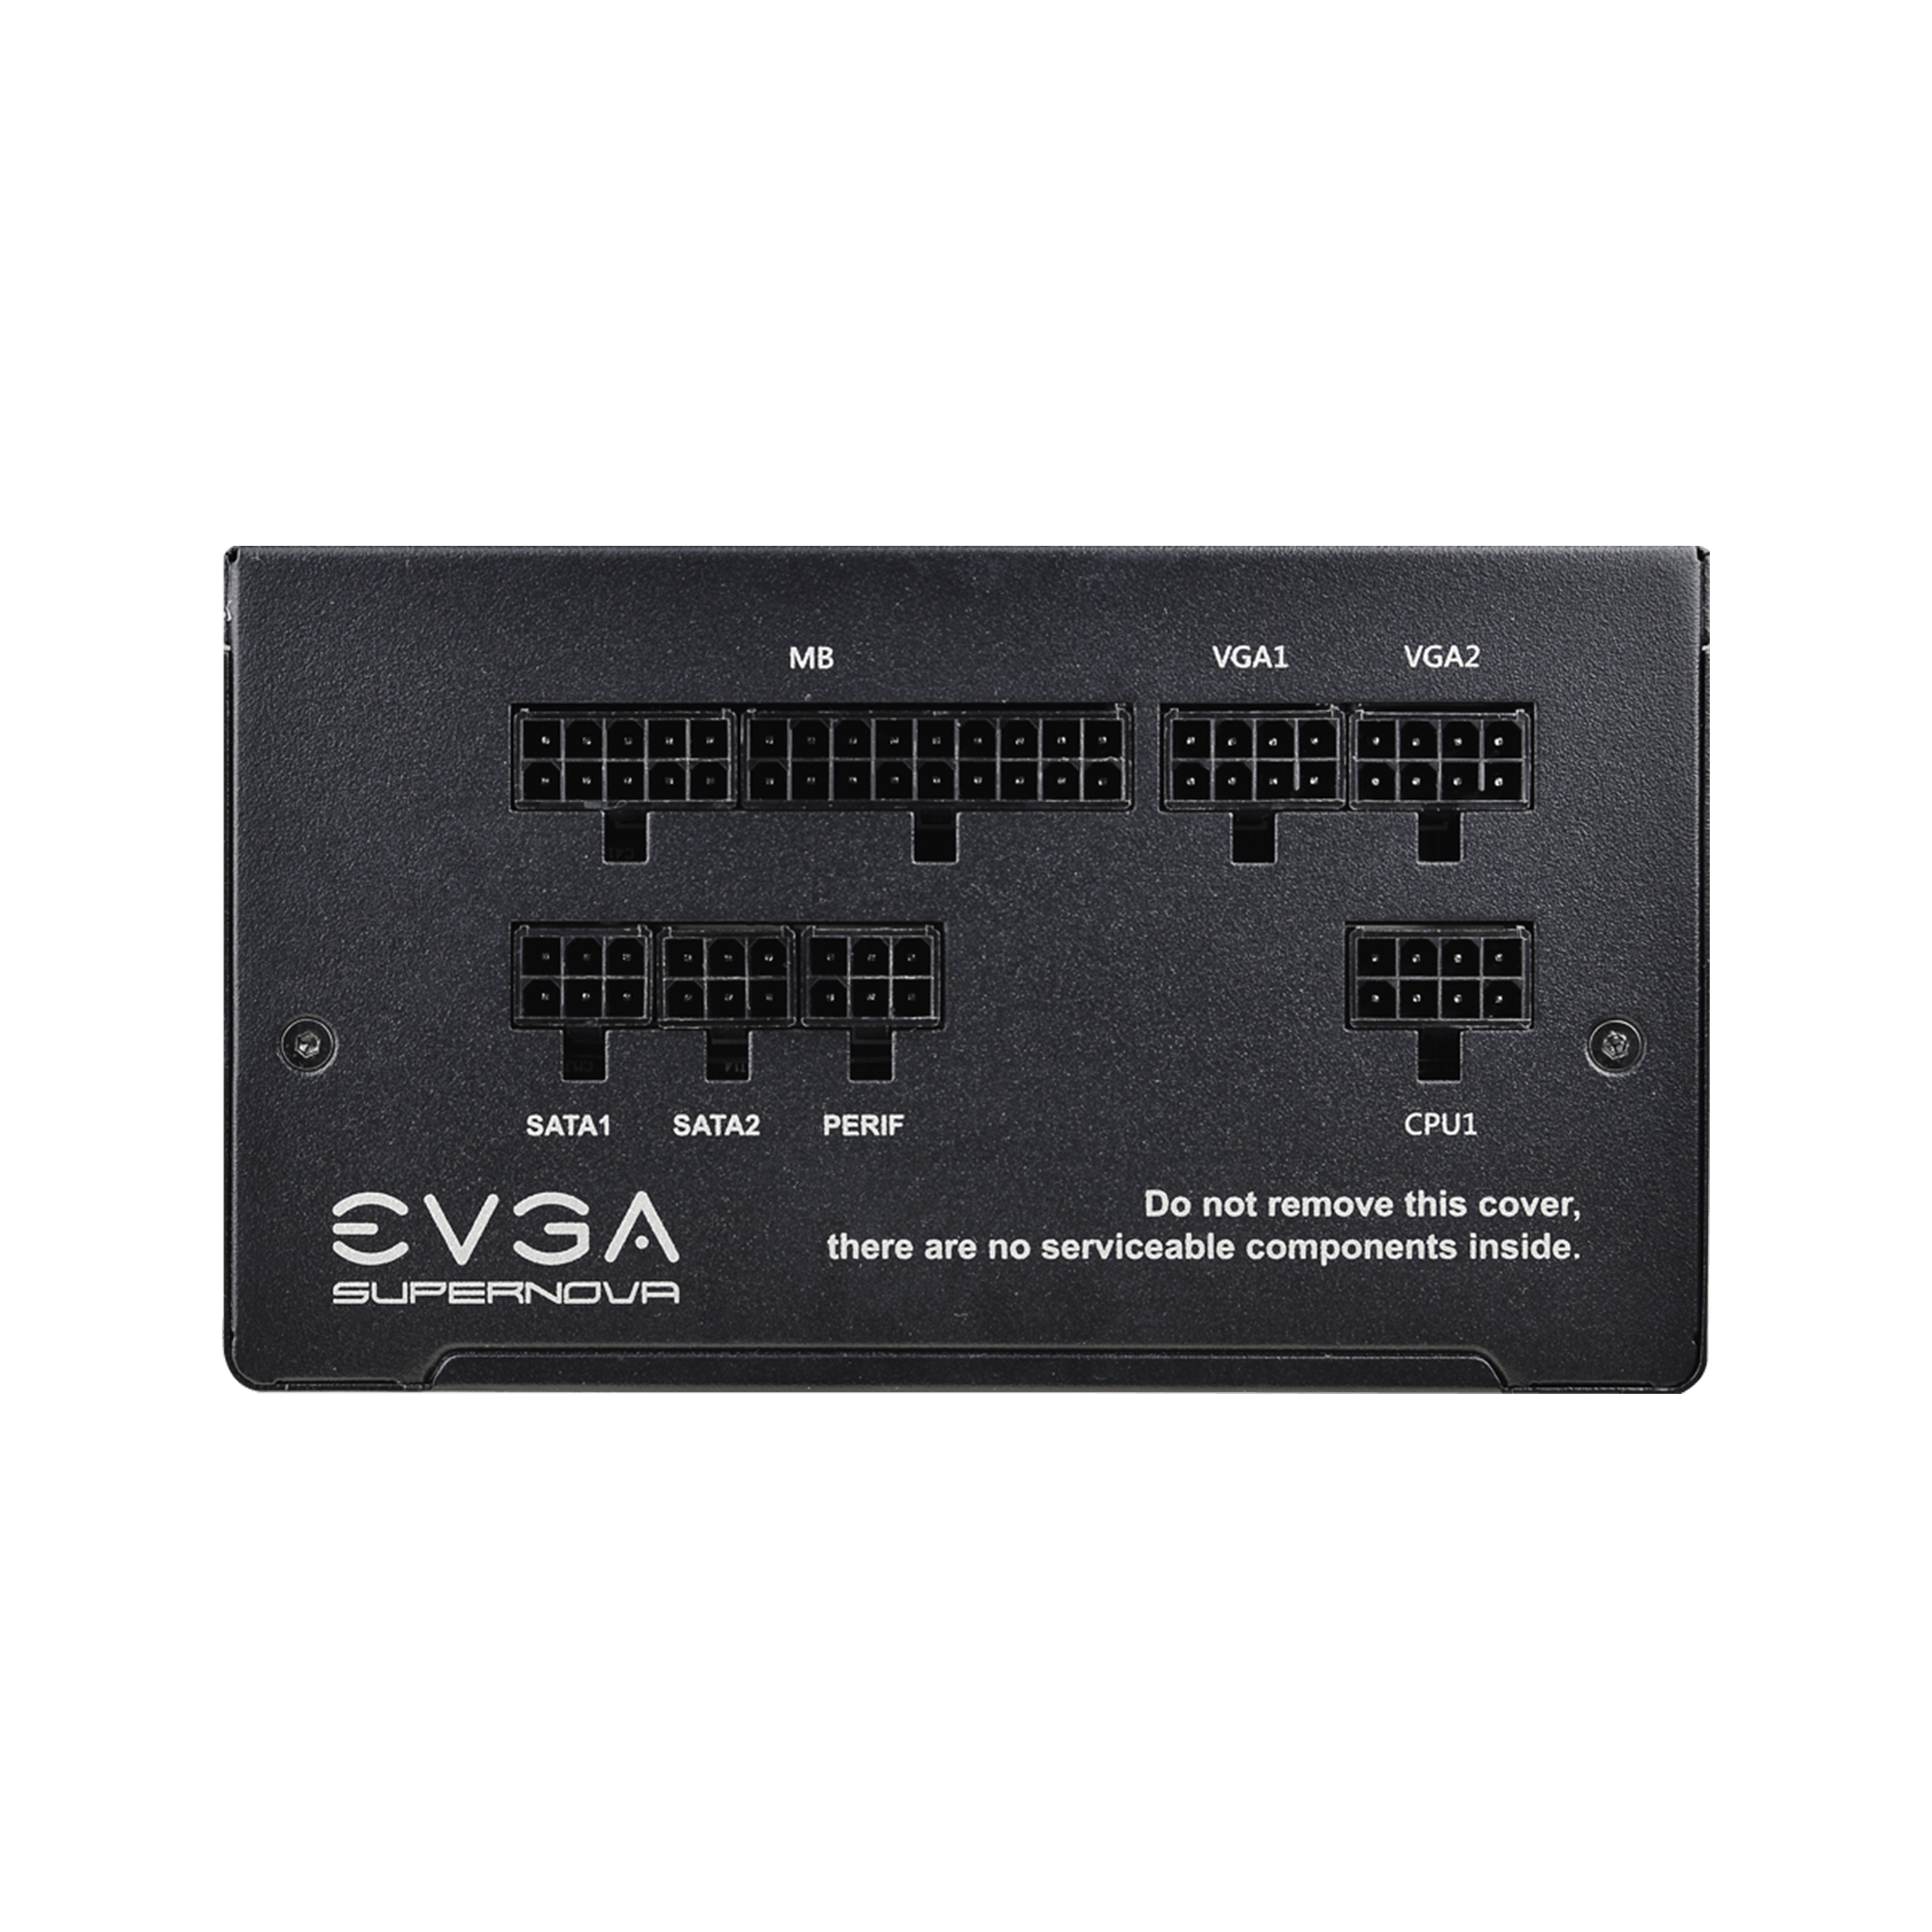 Compact 150mm Size 80 Plus Gold 650W EVGA Supernova 650 GT Fully Modular Power Supply 220-GT-0650-Y1 Includes Power ON Self Tester 7 Year Warranty Auto Eco Mode with FDB Fan 